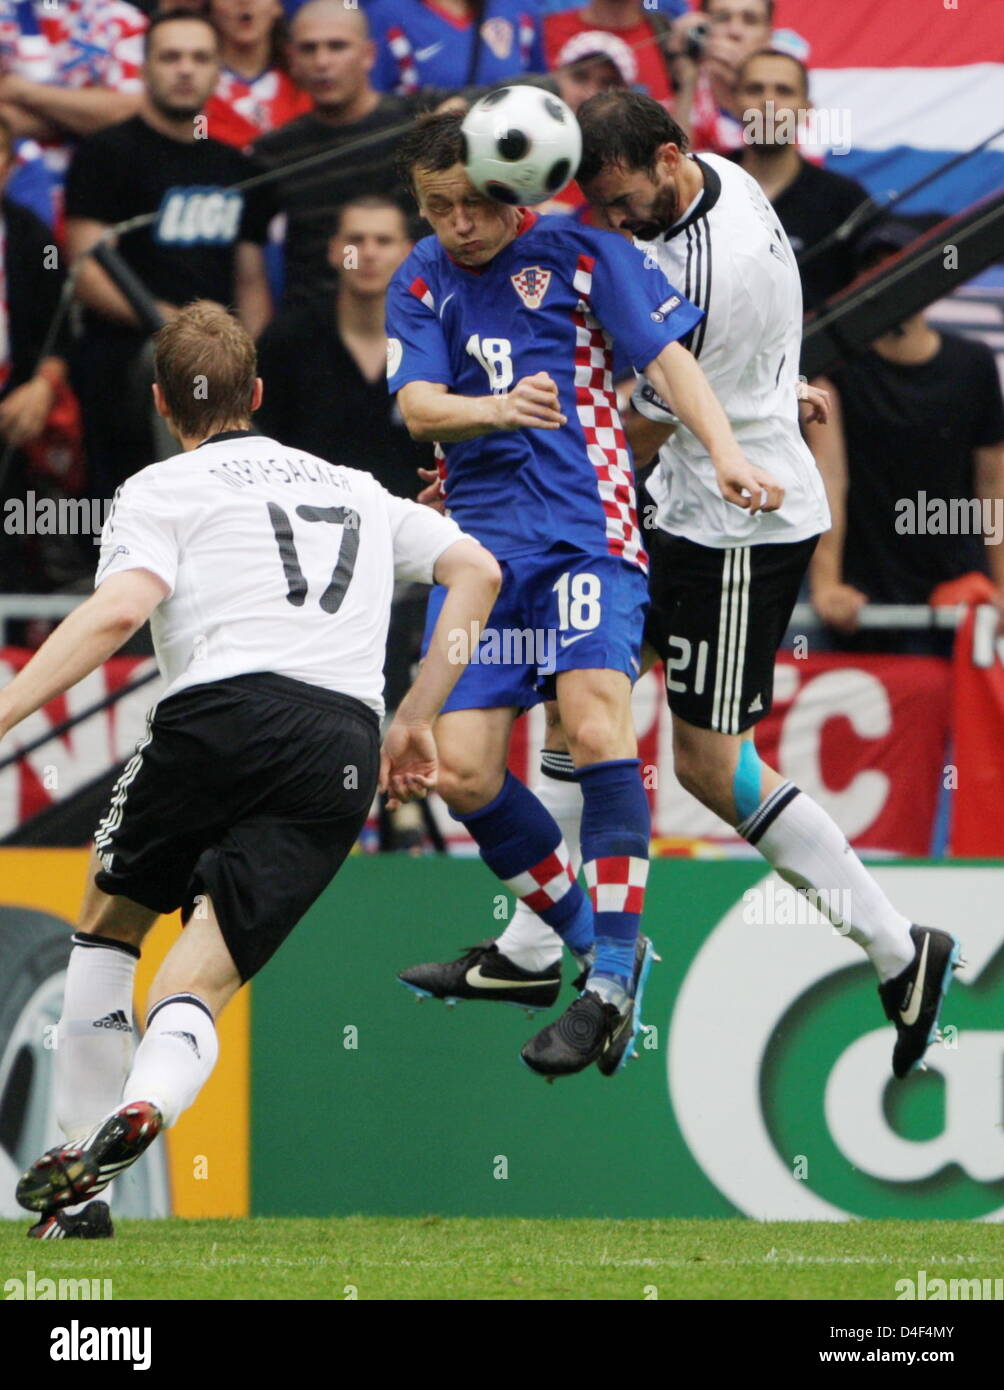 Niko Kranjcar (C) of Croatia vies with Christoph Metzelder (R) of Germany watched by Per Mertesacker (L) during the UEFA EURO 2008 Group B preliminary round match between Croatia and Germany at the Woerthersee stadium in Klagenfurt, Austria, 12 June 2008. Photo: Oliver Berg dpa +please note UEFA restrictions particulary in regard to slide shows and 'No Mobile Services'+ +++(c) dpa  Stock Photo